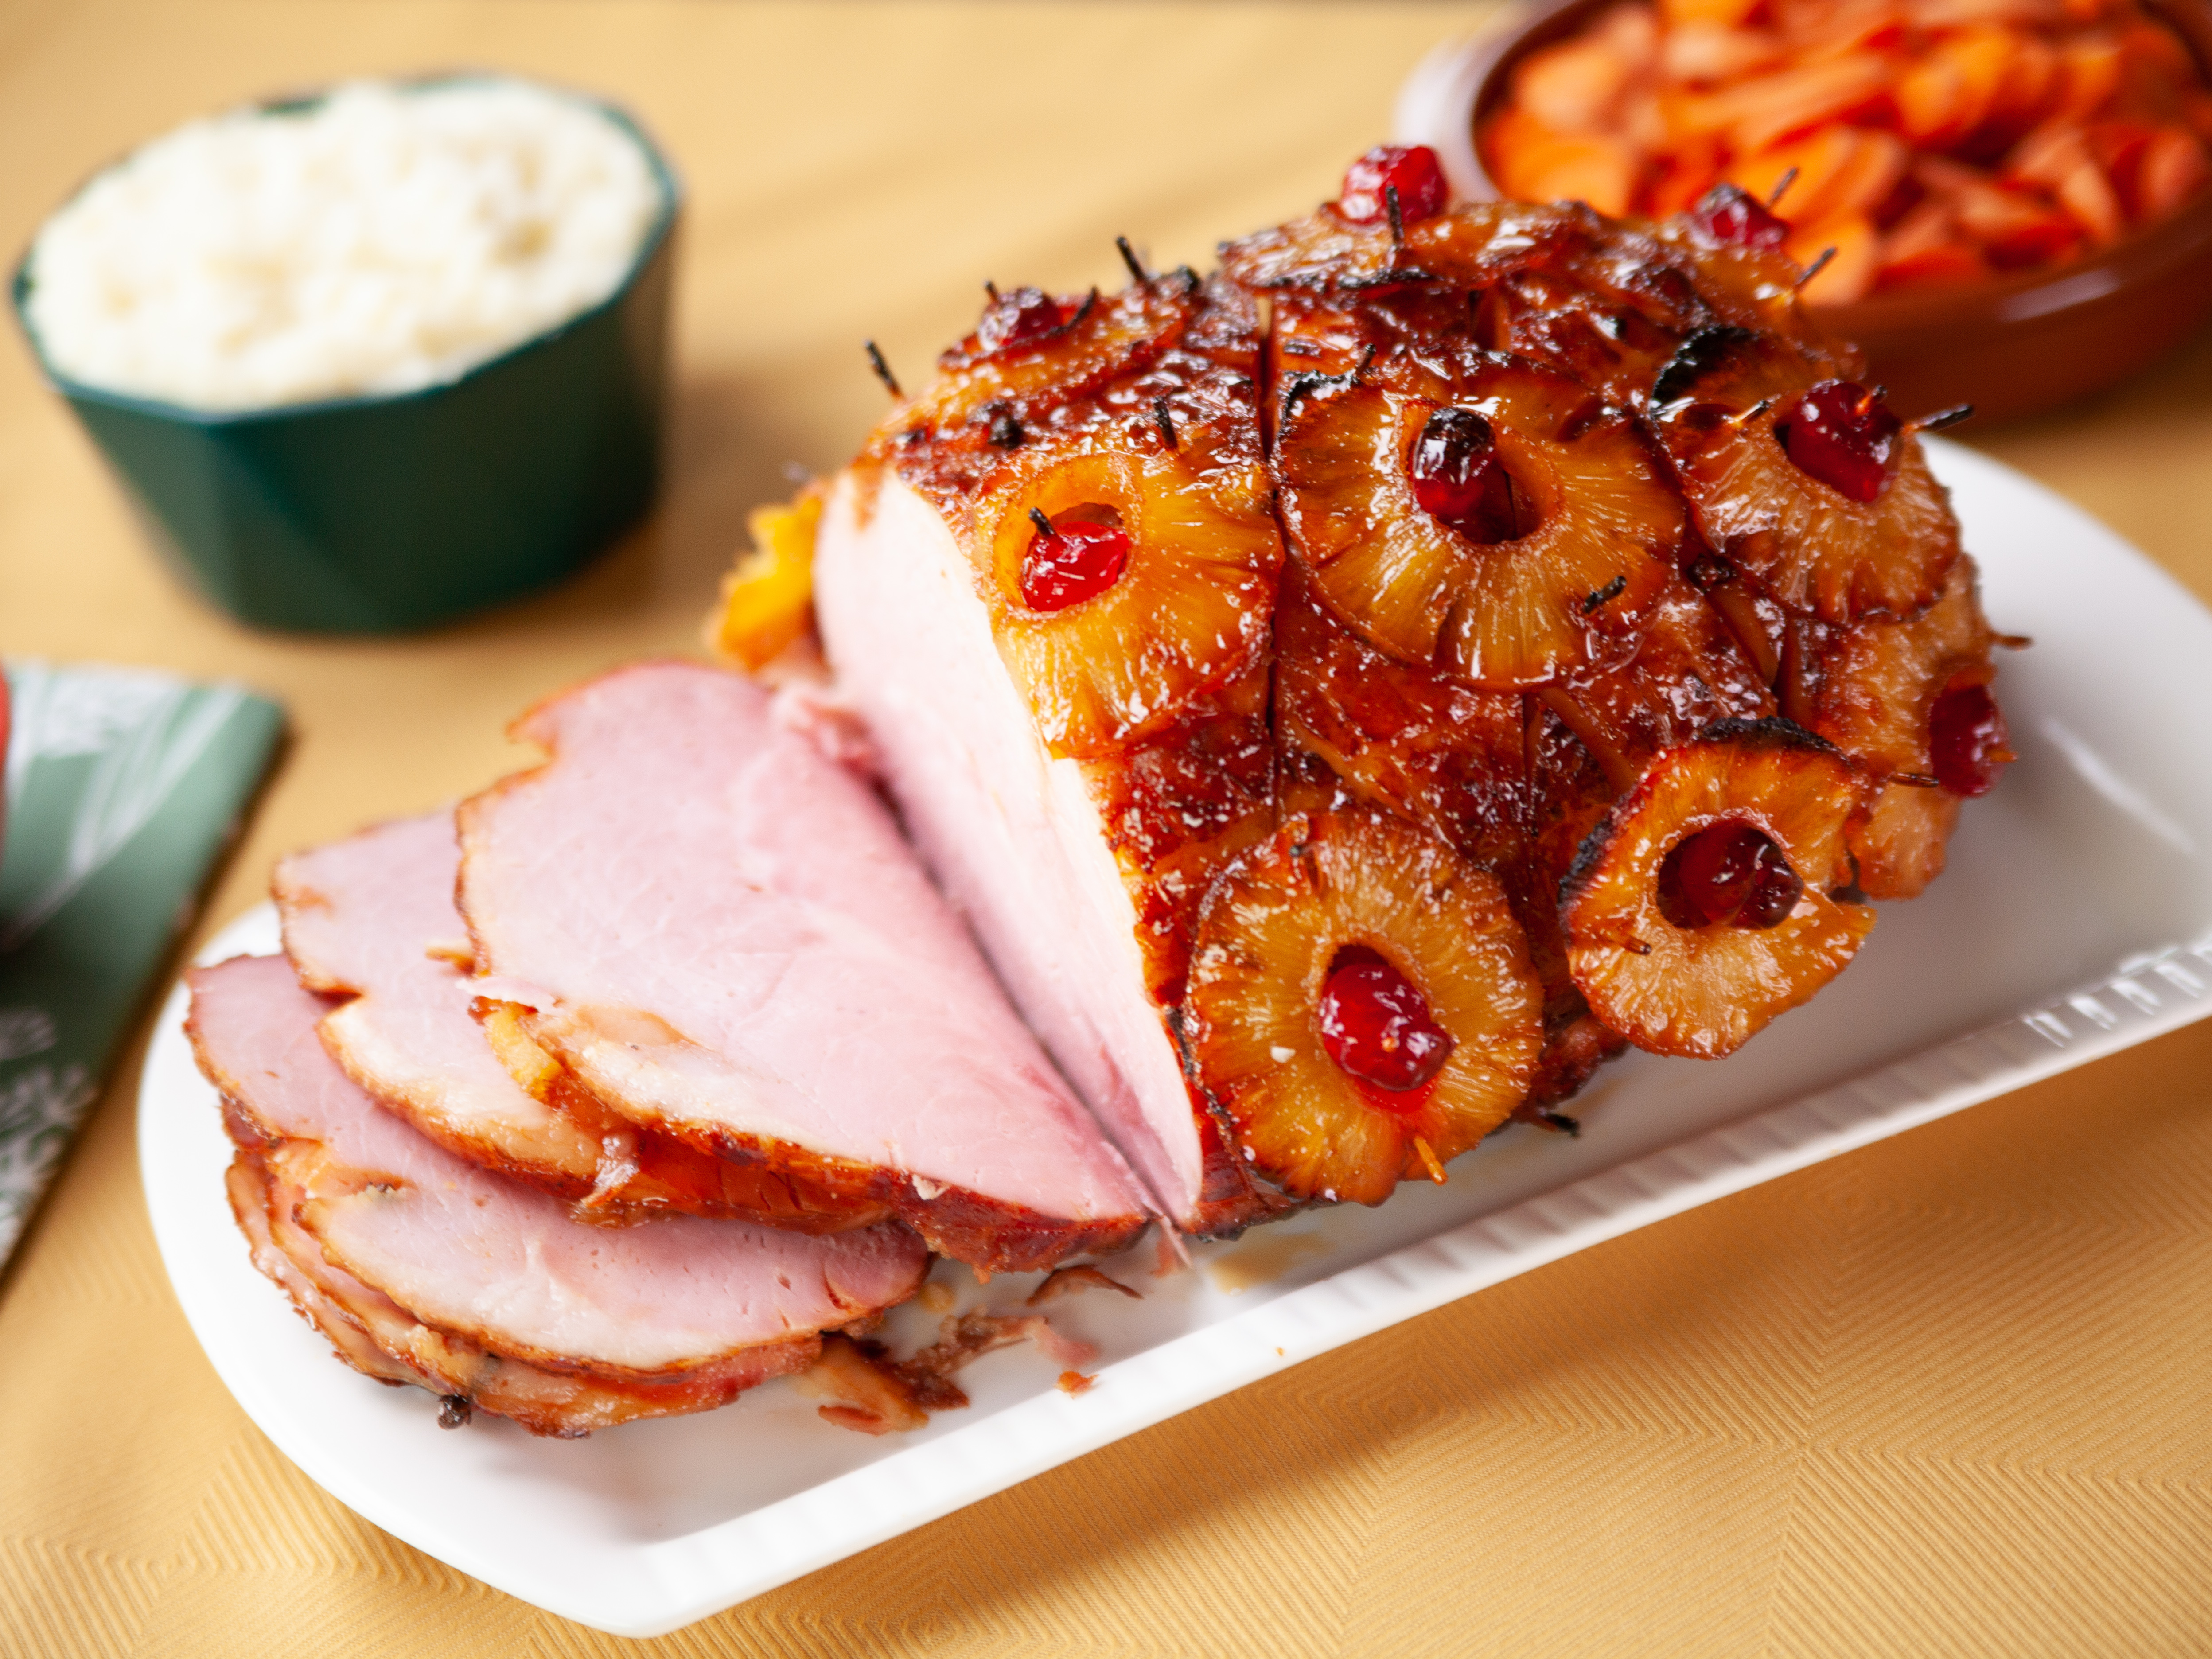 Pineapple Baked Ham Recipe - How To Bake The Perfect Holiday Ham